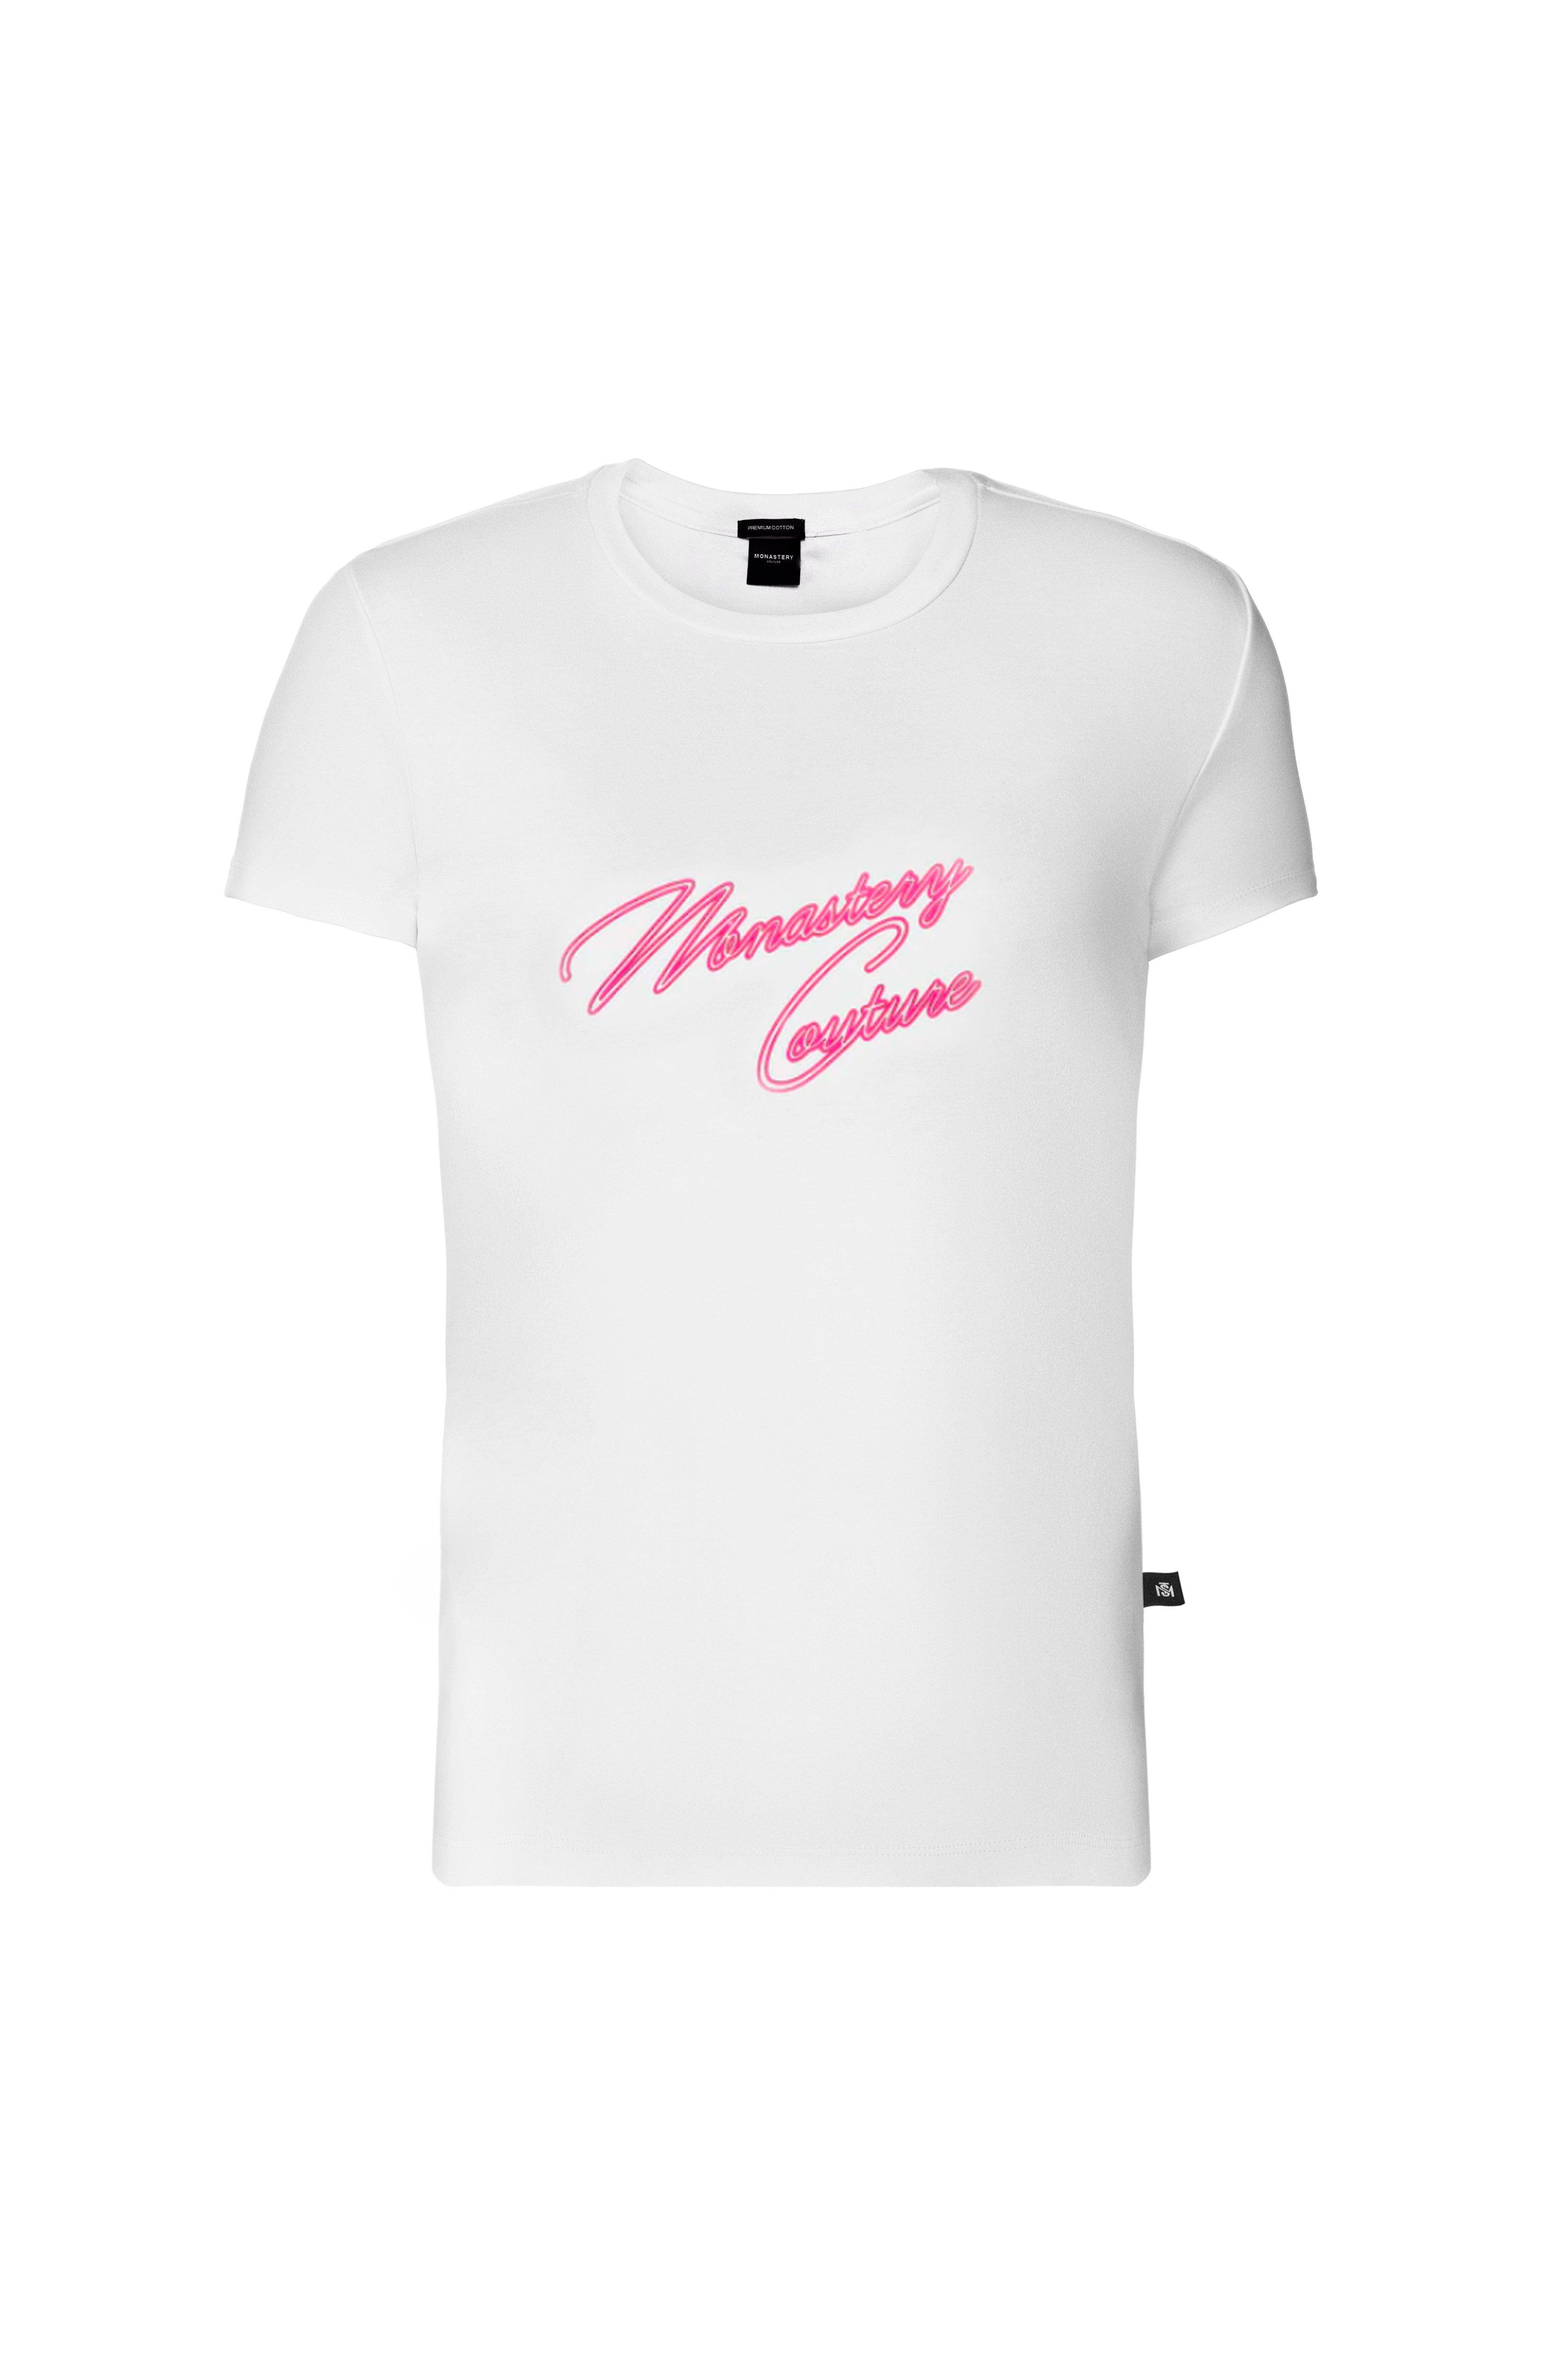 LORD HOWE T-SHIRT WHITE | Monastery Couture